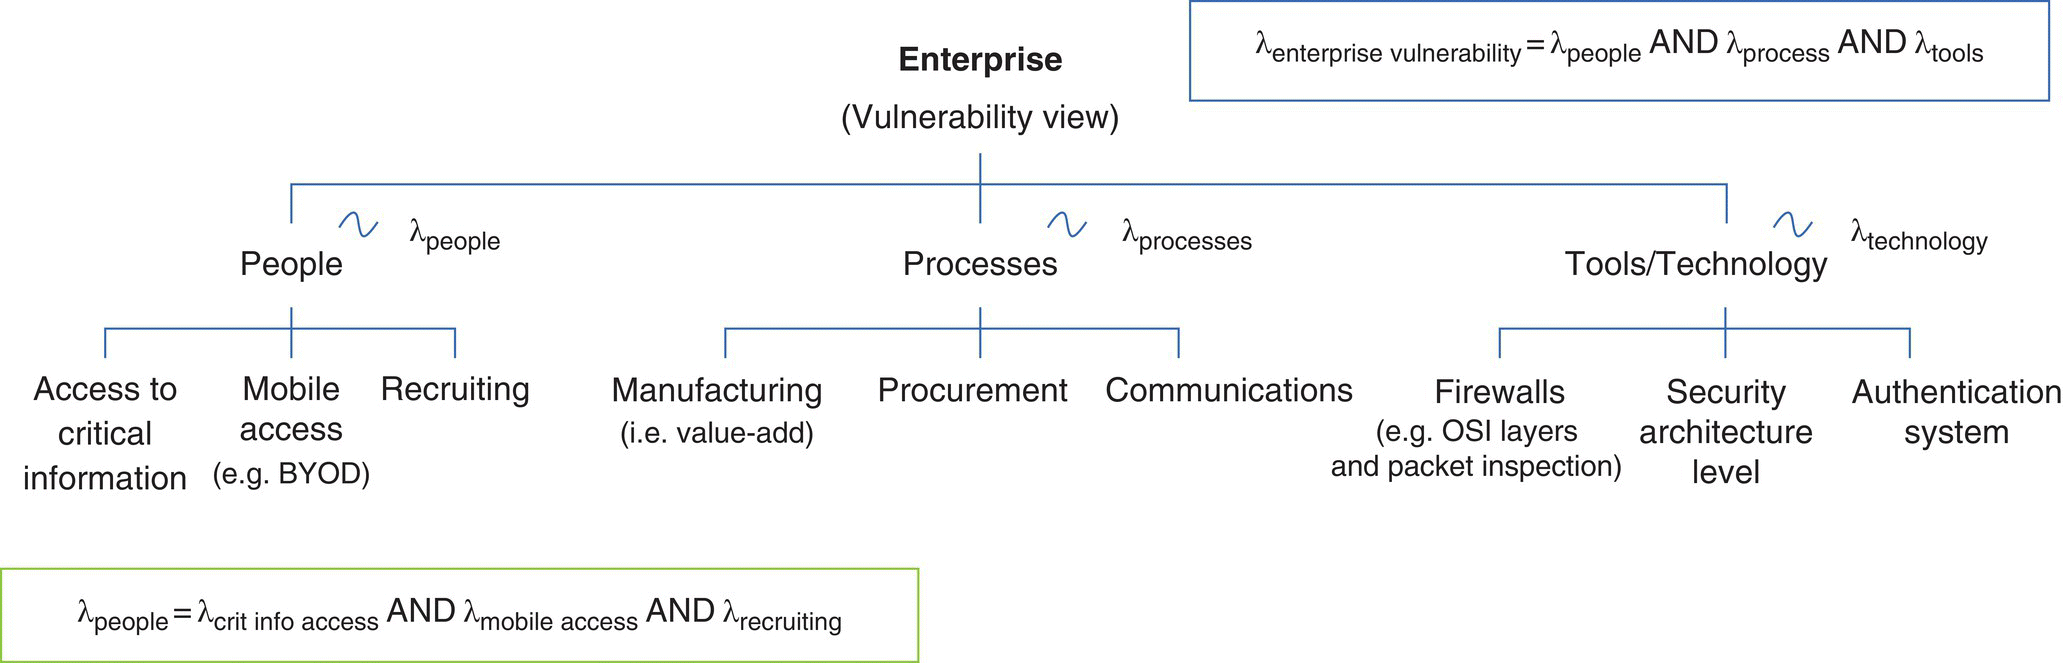 Enterprise model and parameterization (vulnerability view) branching to people, processes, and tools/technology. People to critical information access, mobile access, and recruiting.